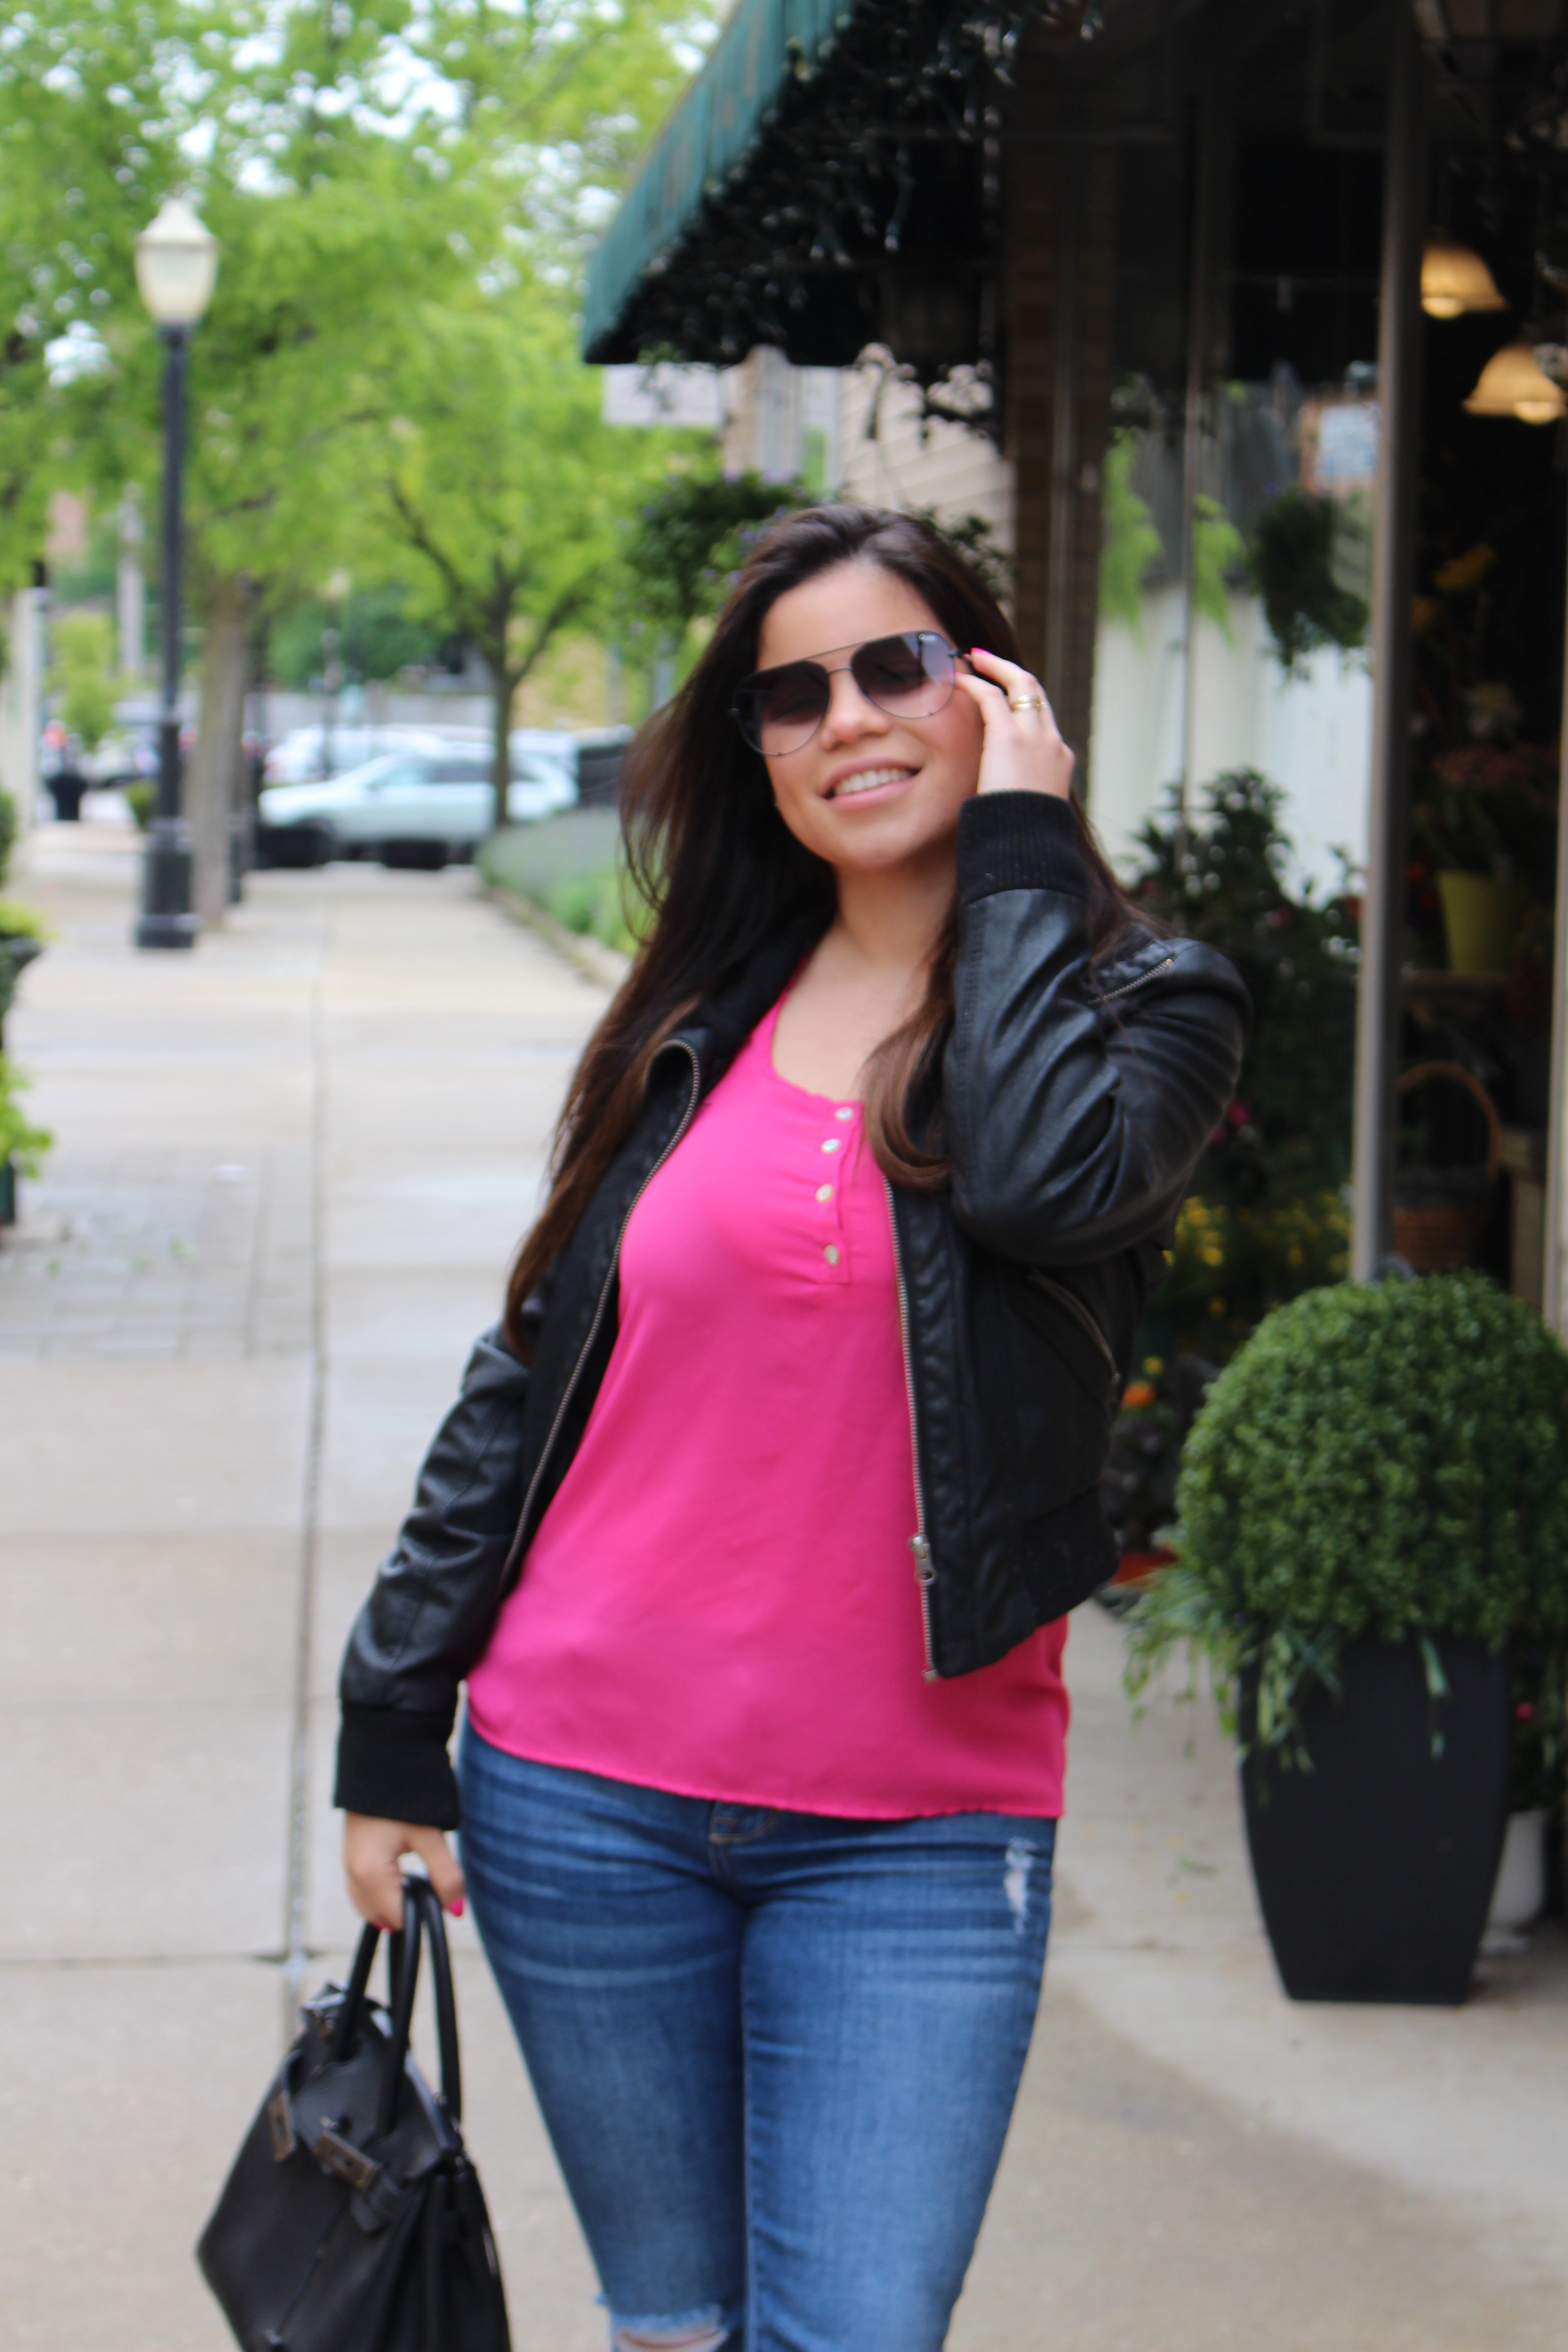 mothers day outfit casual OUTFIT OOTD OOTN quay australia desi perkins street fashion chicago blogger by alejandra avila tufashionpetite